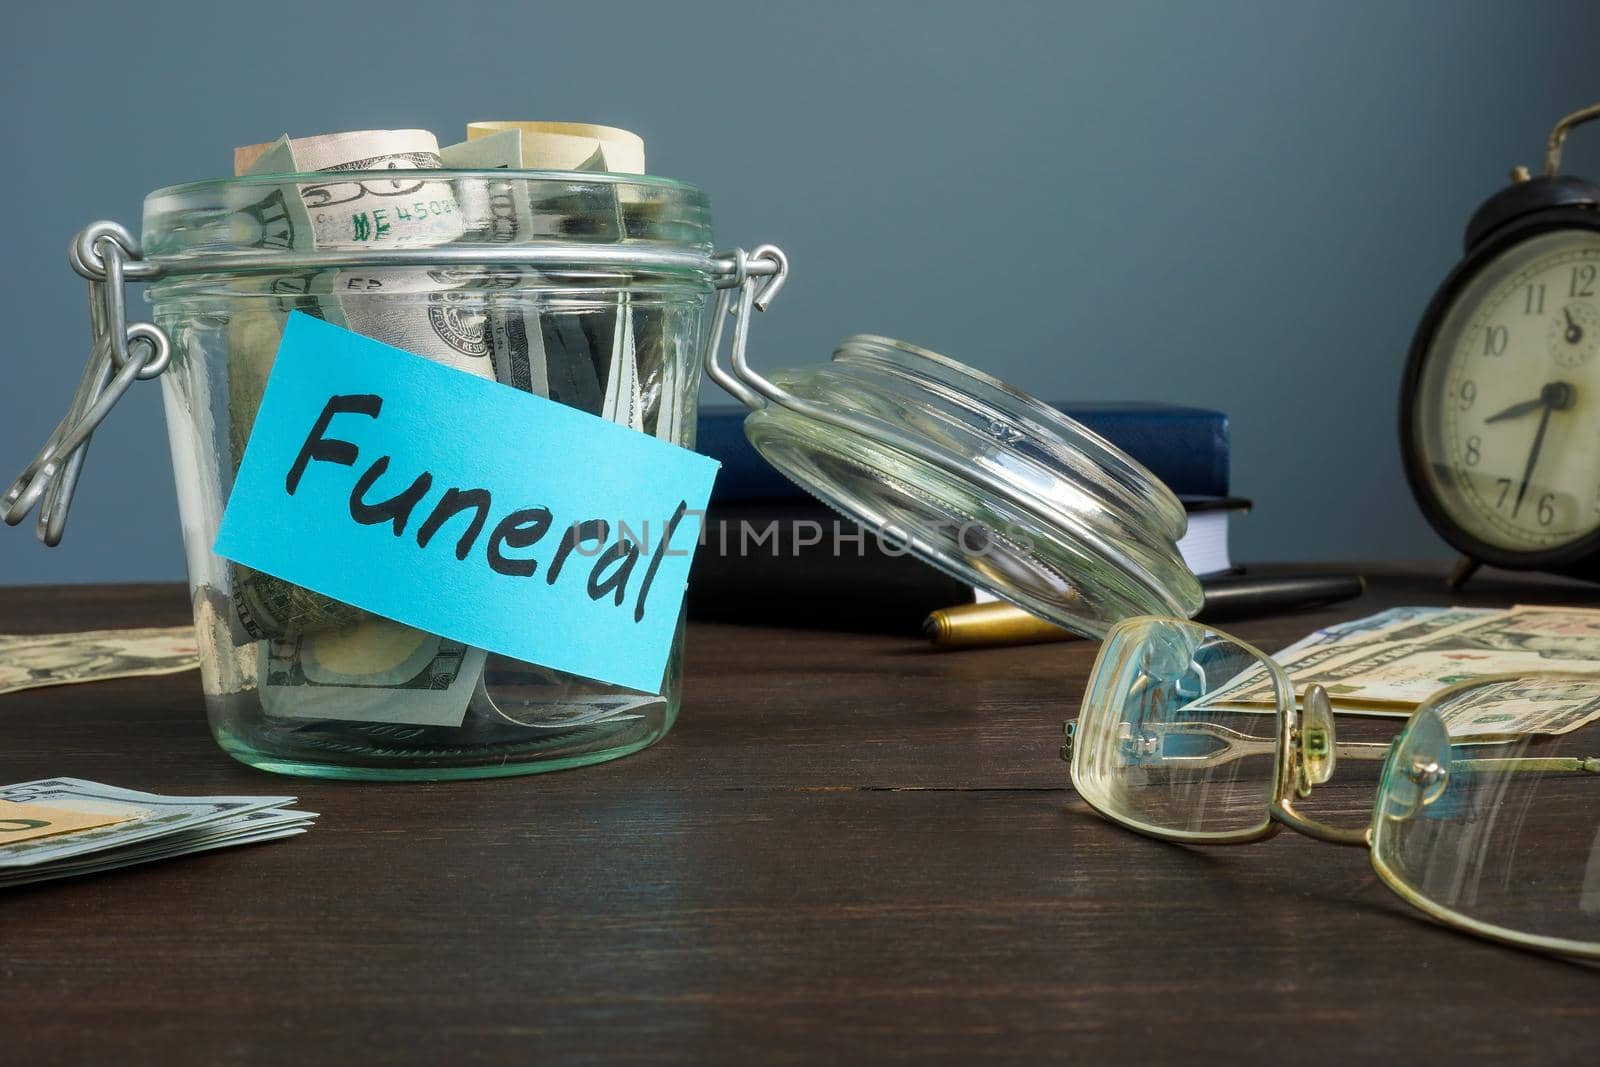 Funeral fund in the glass jar with money.